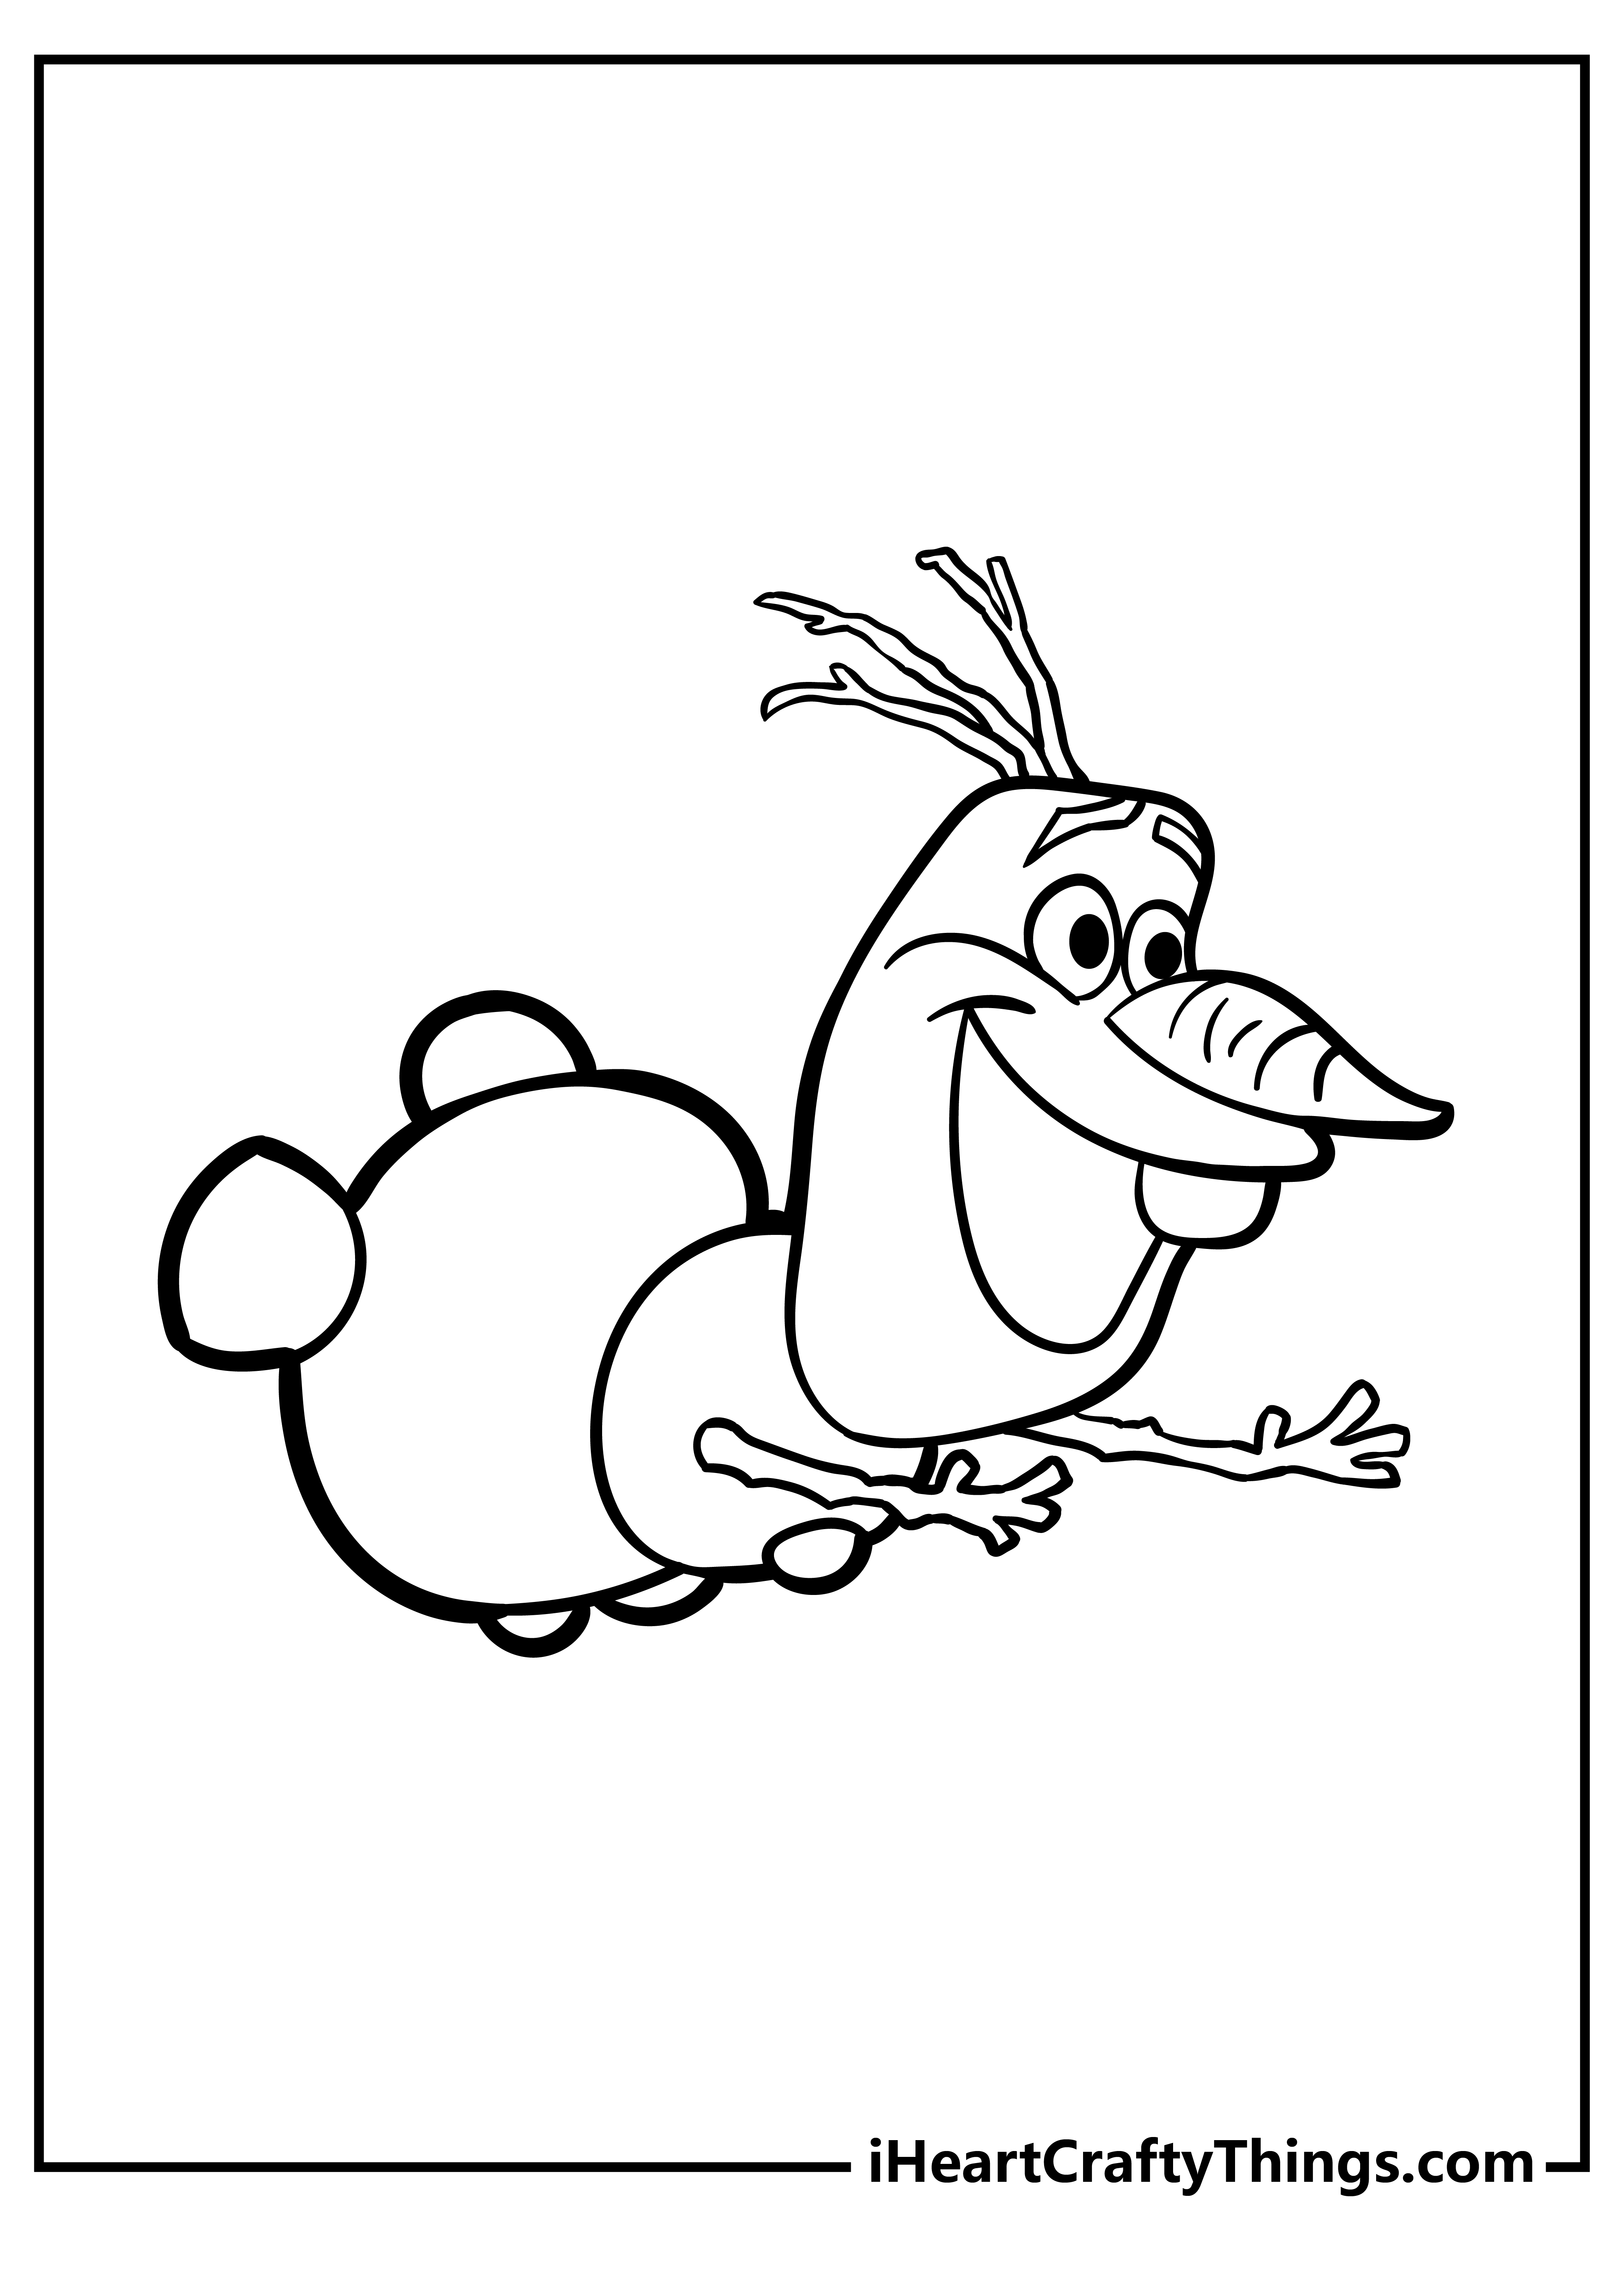 Olaf coloring pages free printables